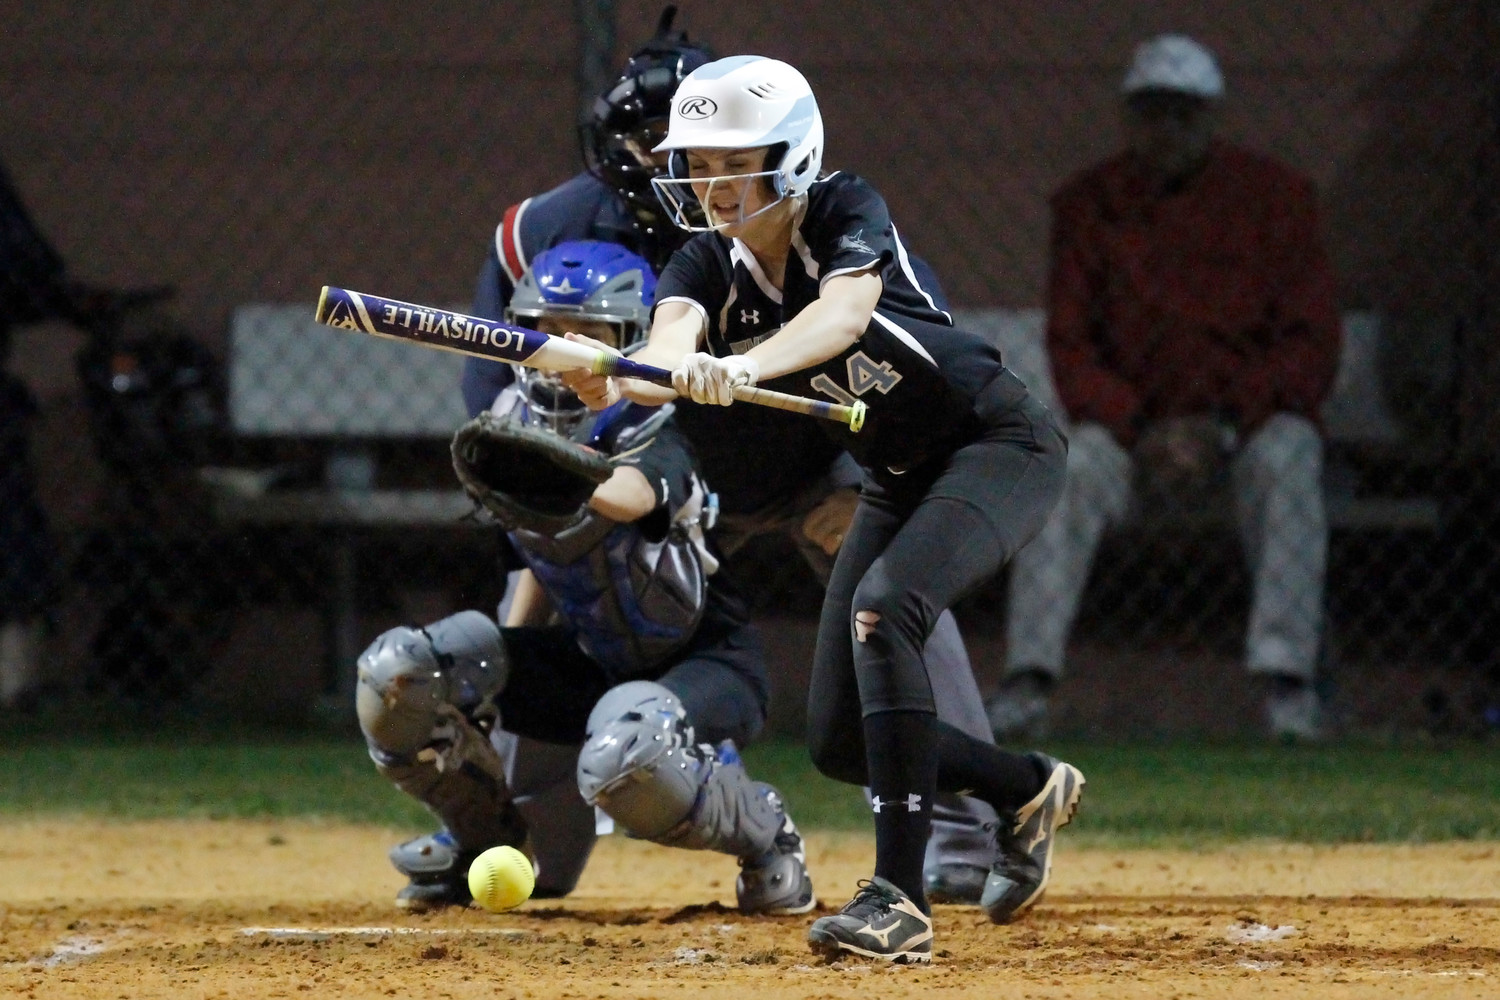 Catherine Beaton (14) of the Sharks drops a bunt in front of home plate.